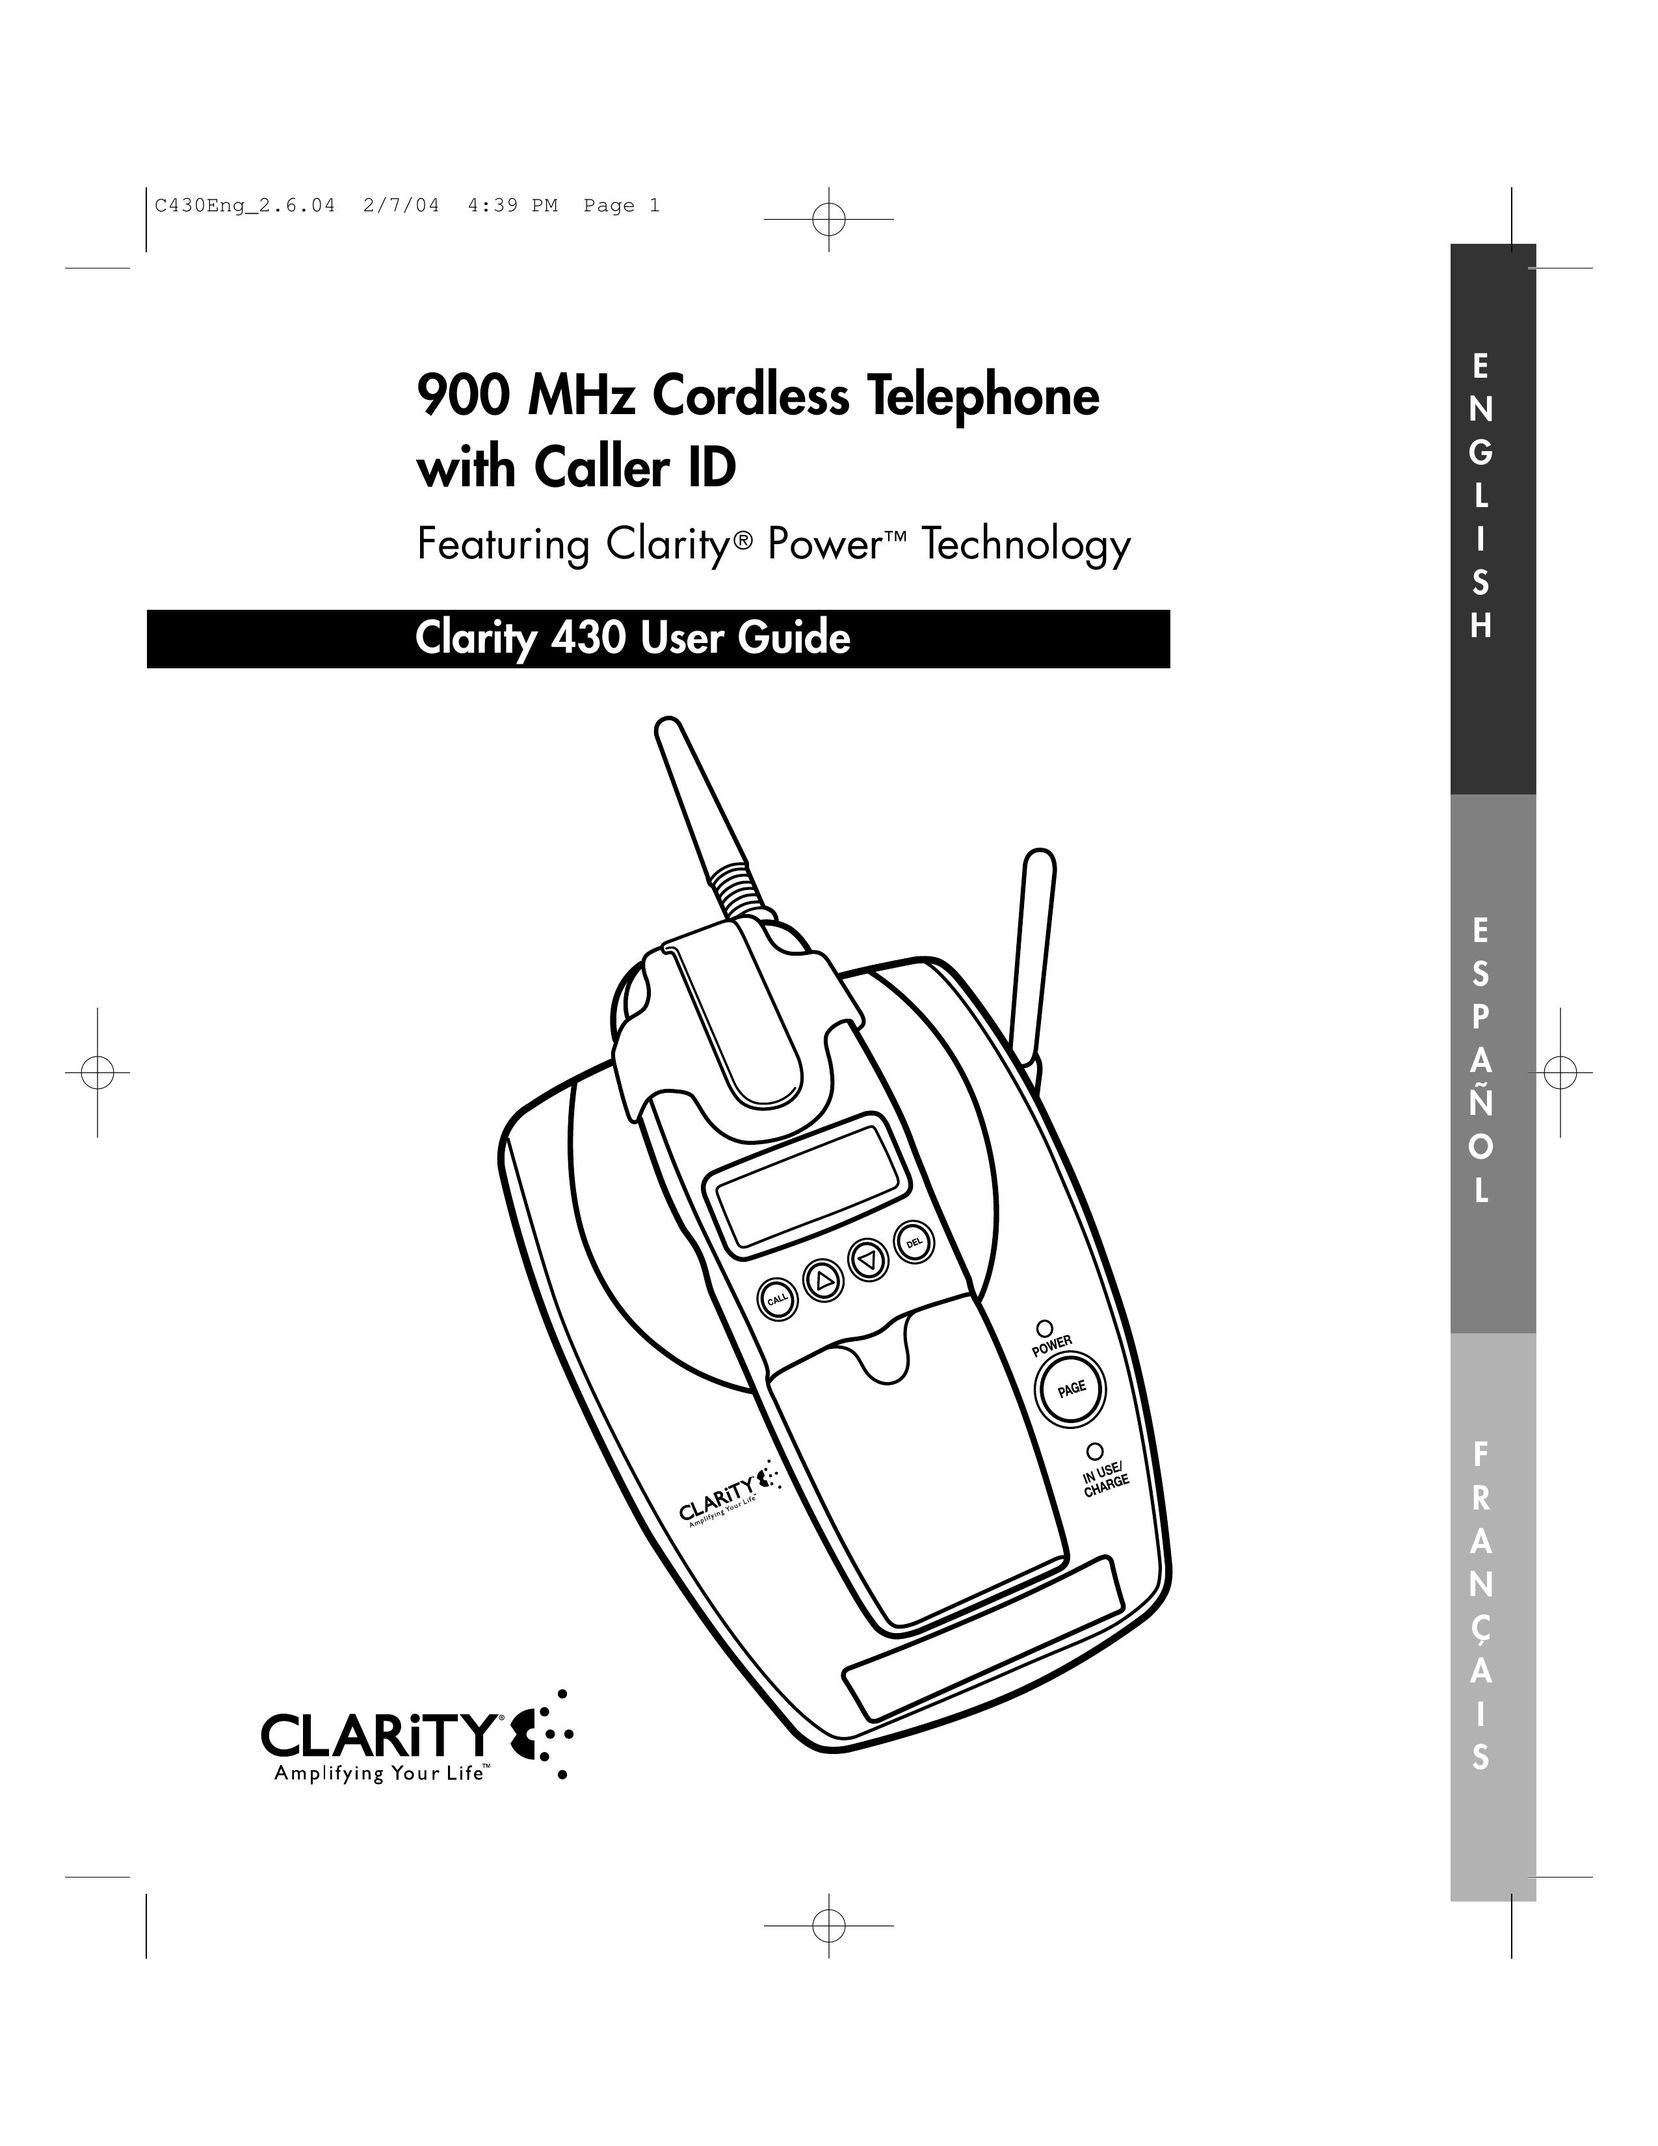 Clarity 430 Cordless Telephone User Manual (Page 1)